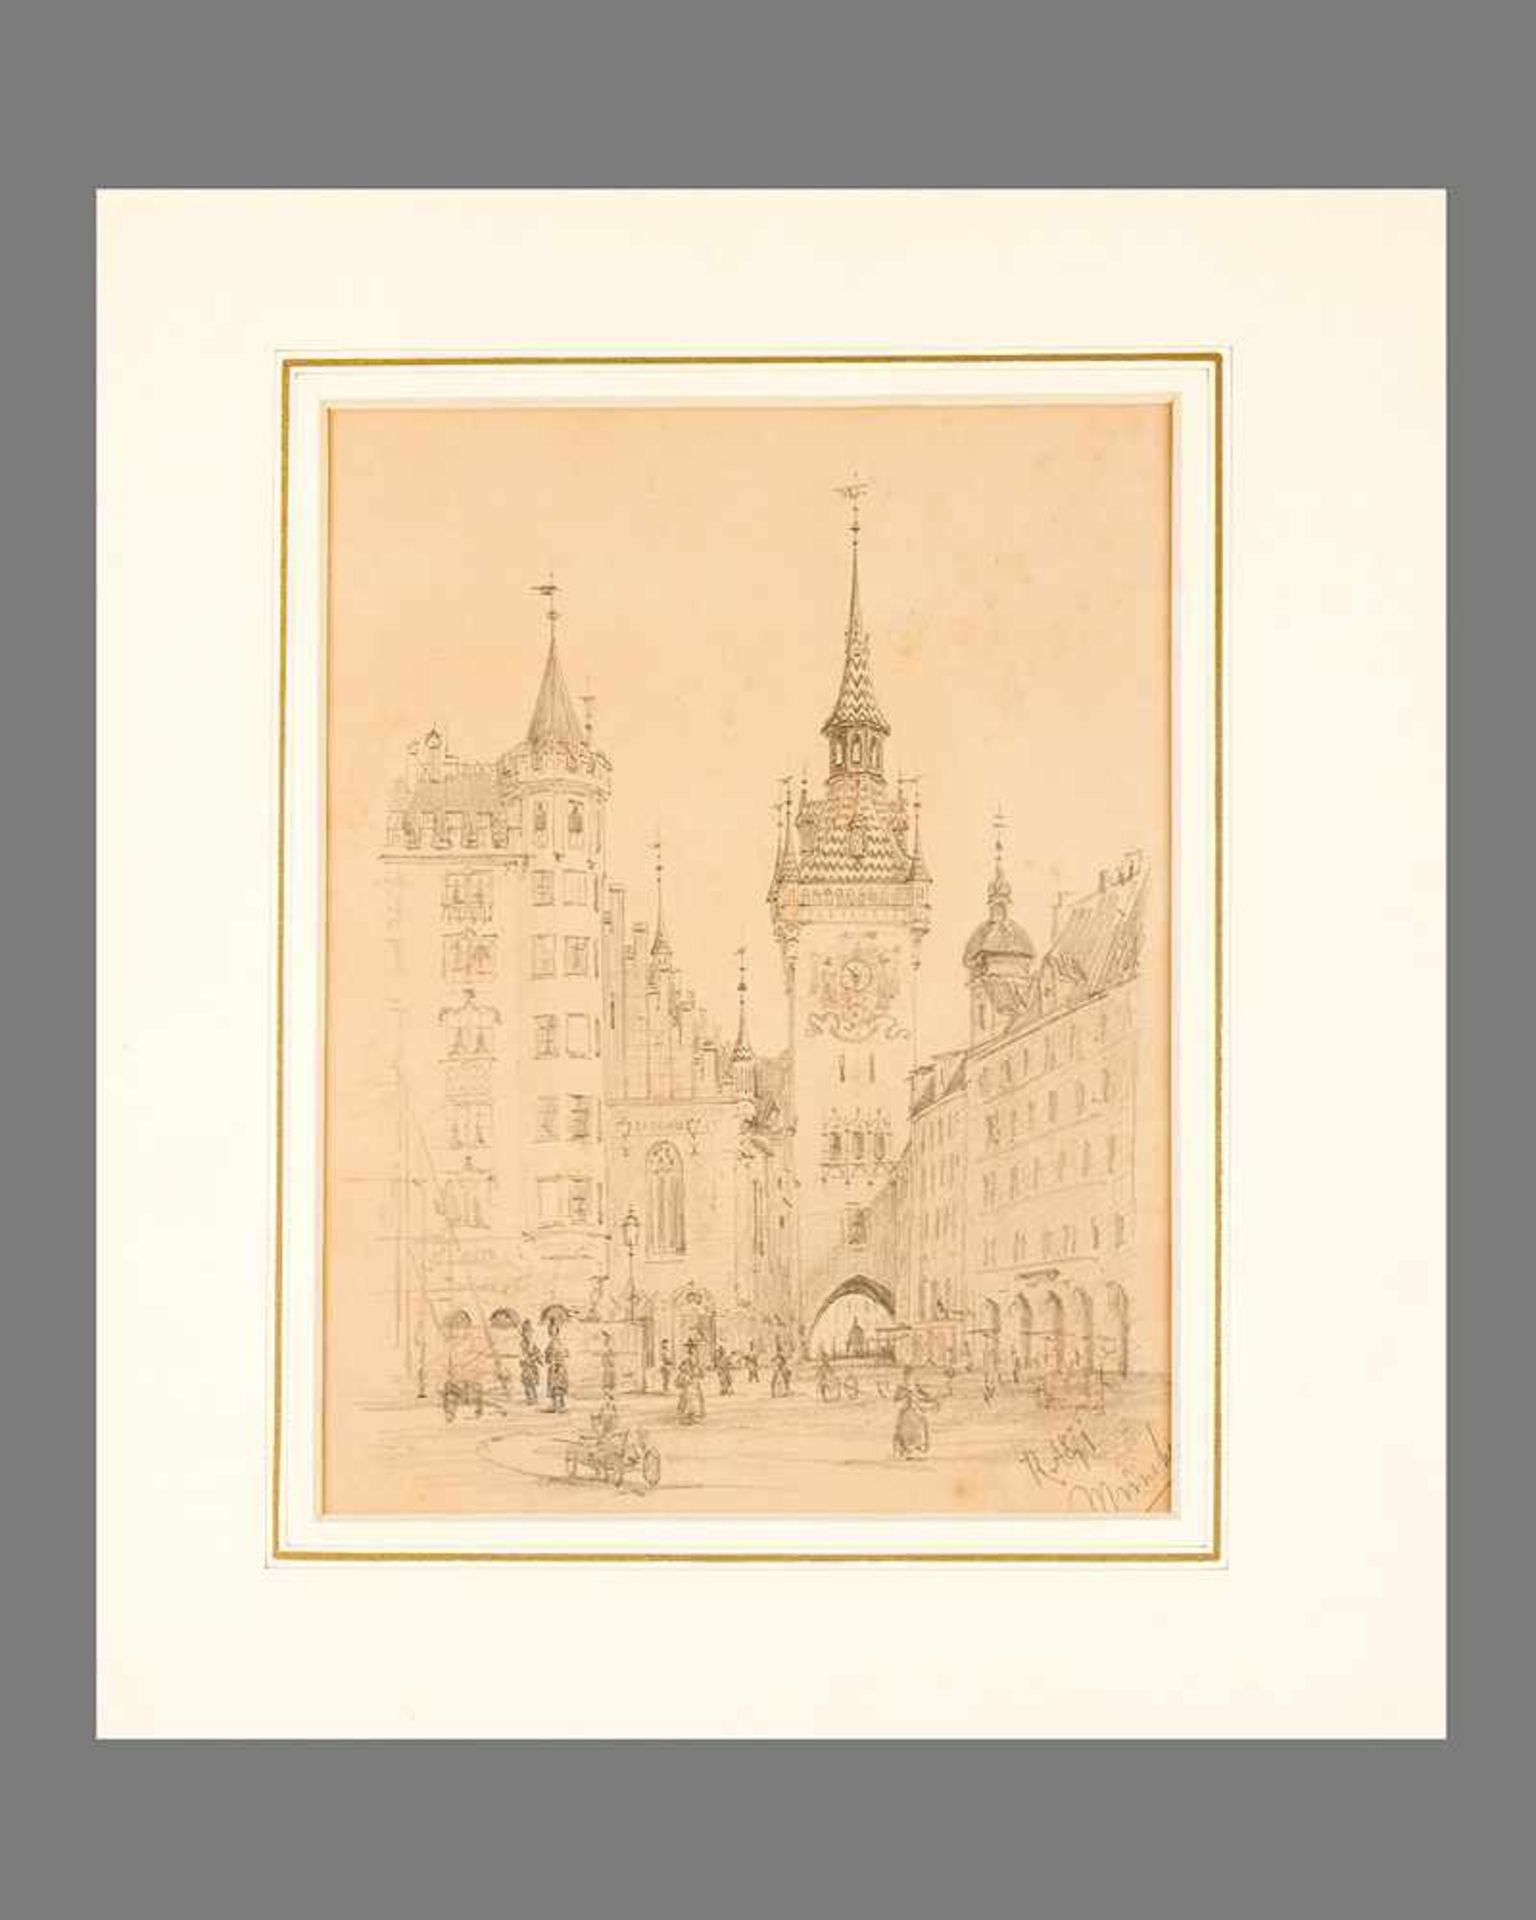 Rudolf Ritter von Alt (1812-1905), Old Town Hall Munich; pencil on paper; signed bottom right and